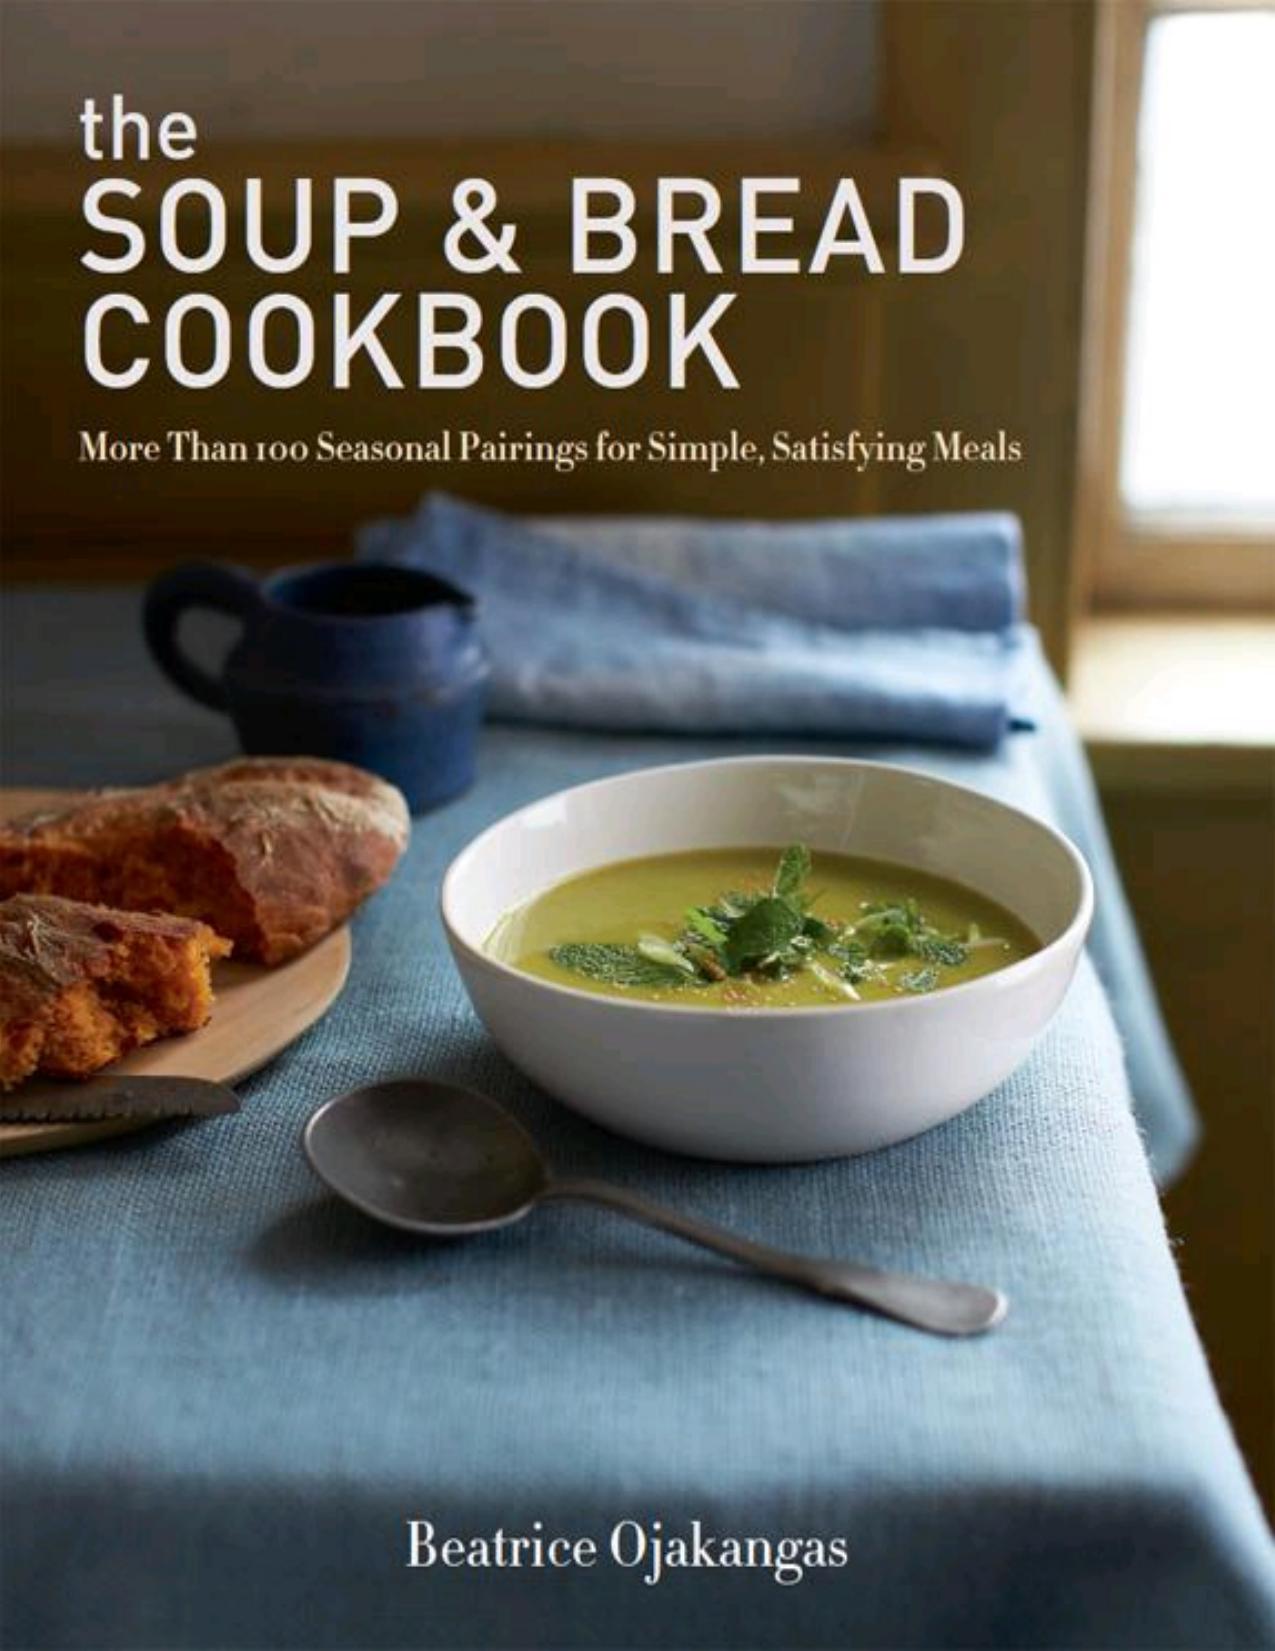 The Soup & Bread Cookbook by Beatrice Ojakangas